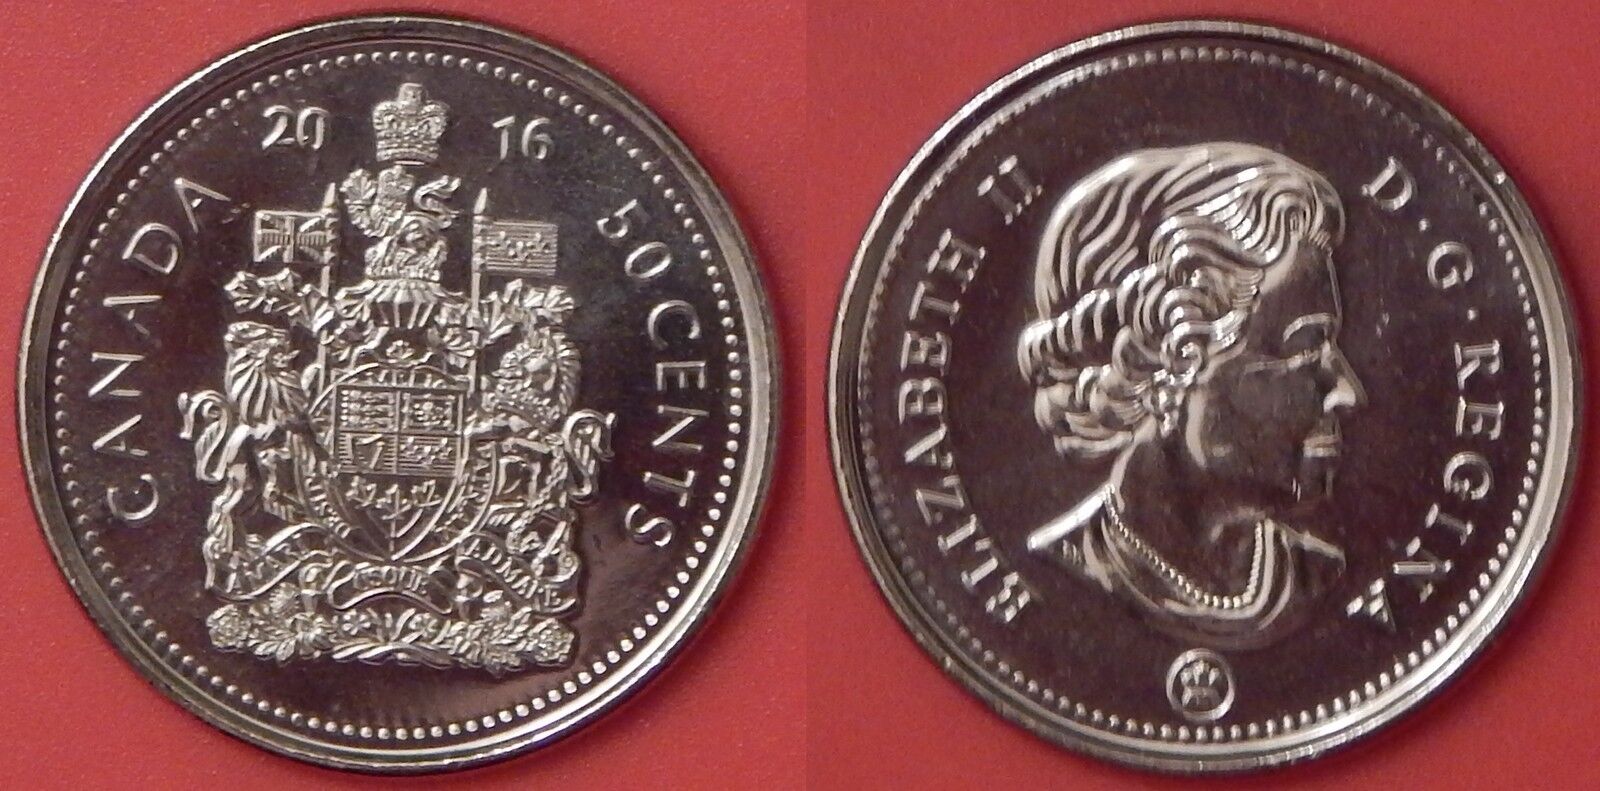 Brilliant Uncirculated 2016 Canada 50 Cents From Mint's Roll